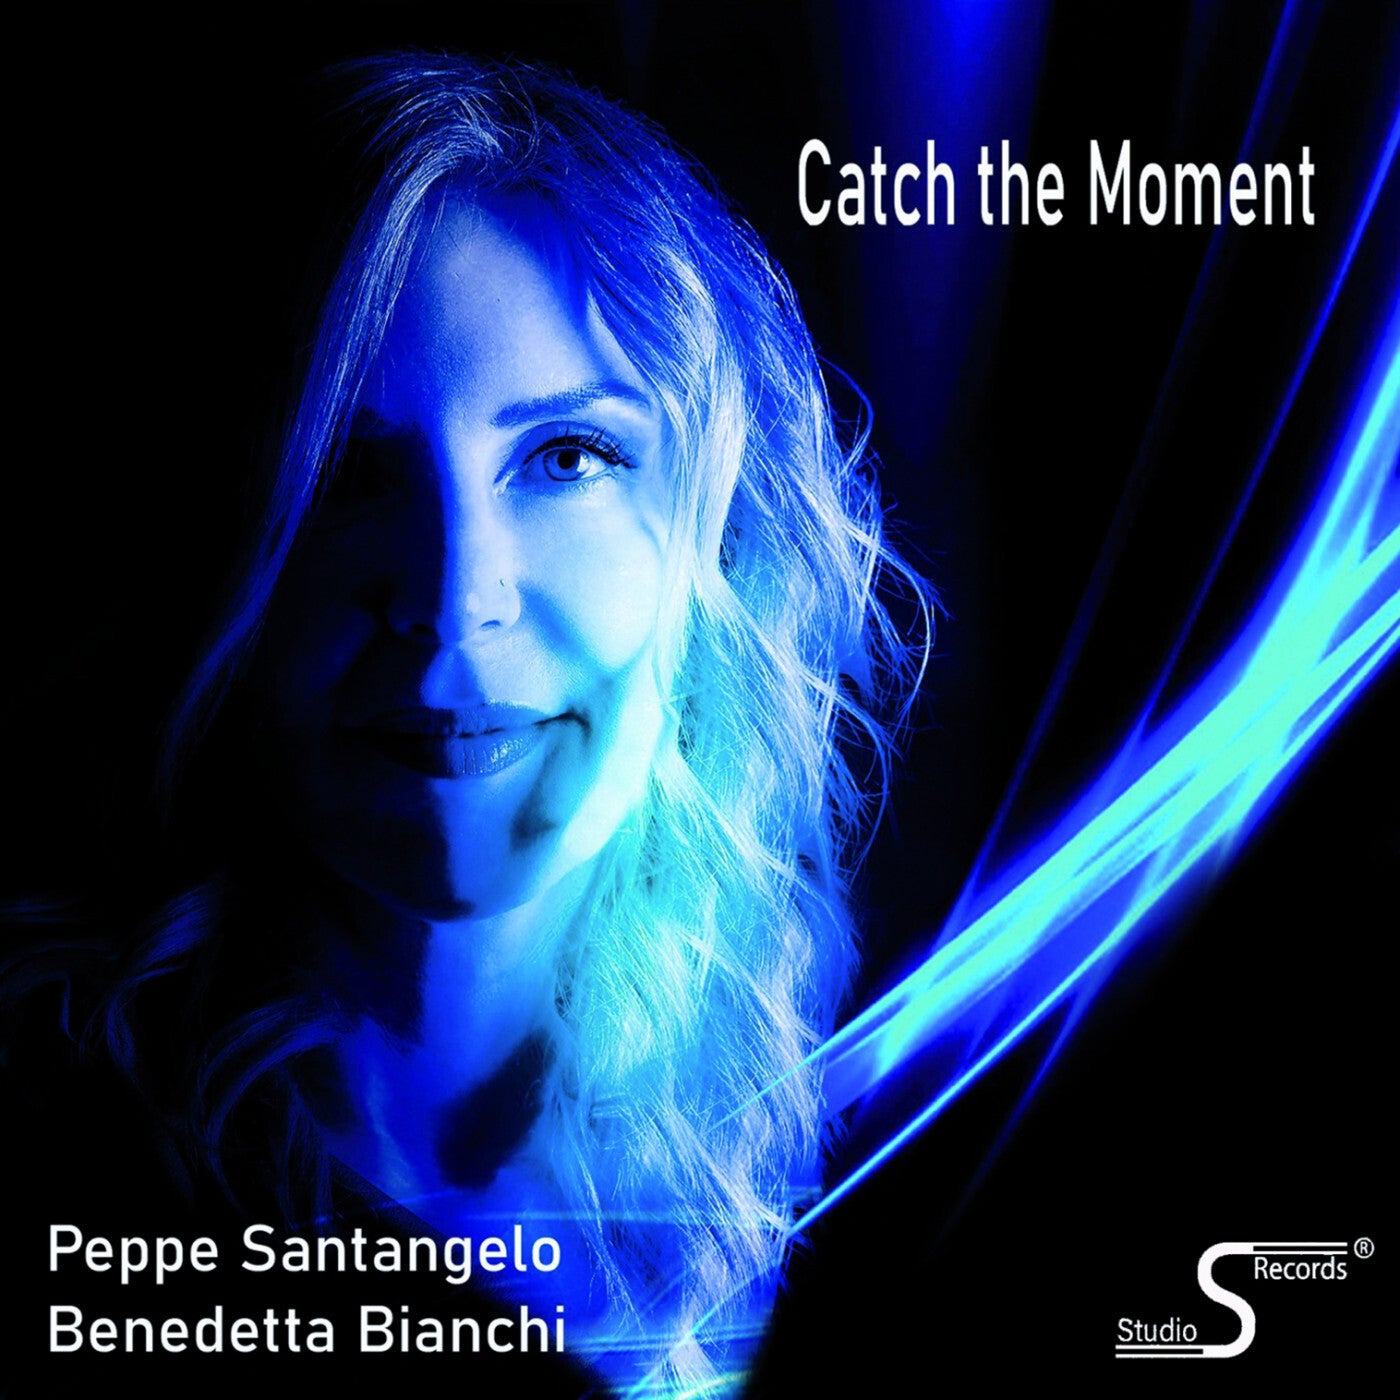 Catch the Moment (Feat Benedetta Bianchi)